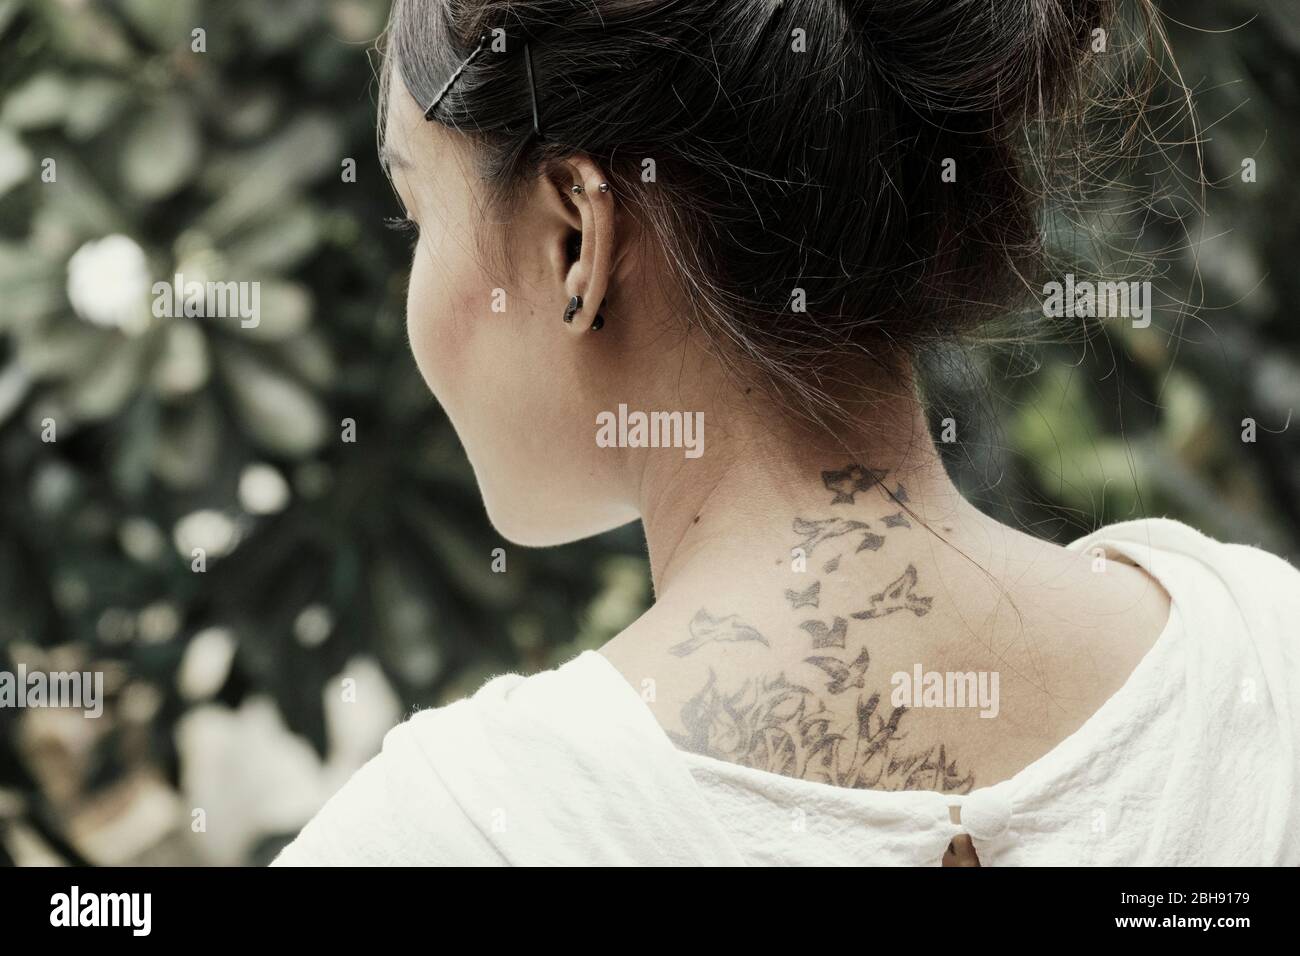 12 Elegant Neck Tattoo Design Ideas You Should Consider Getting | Preview.ph